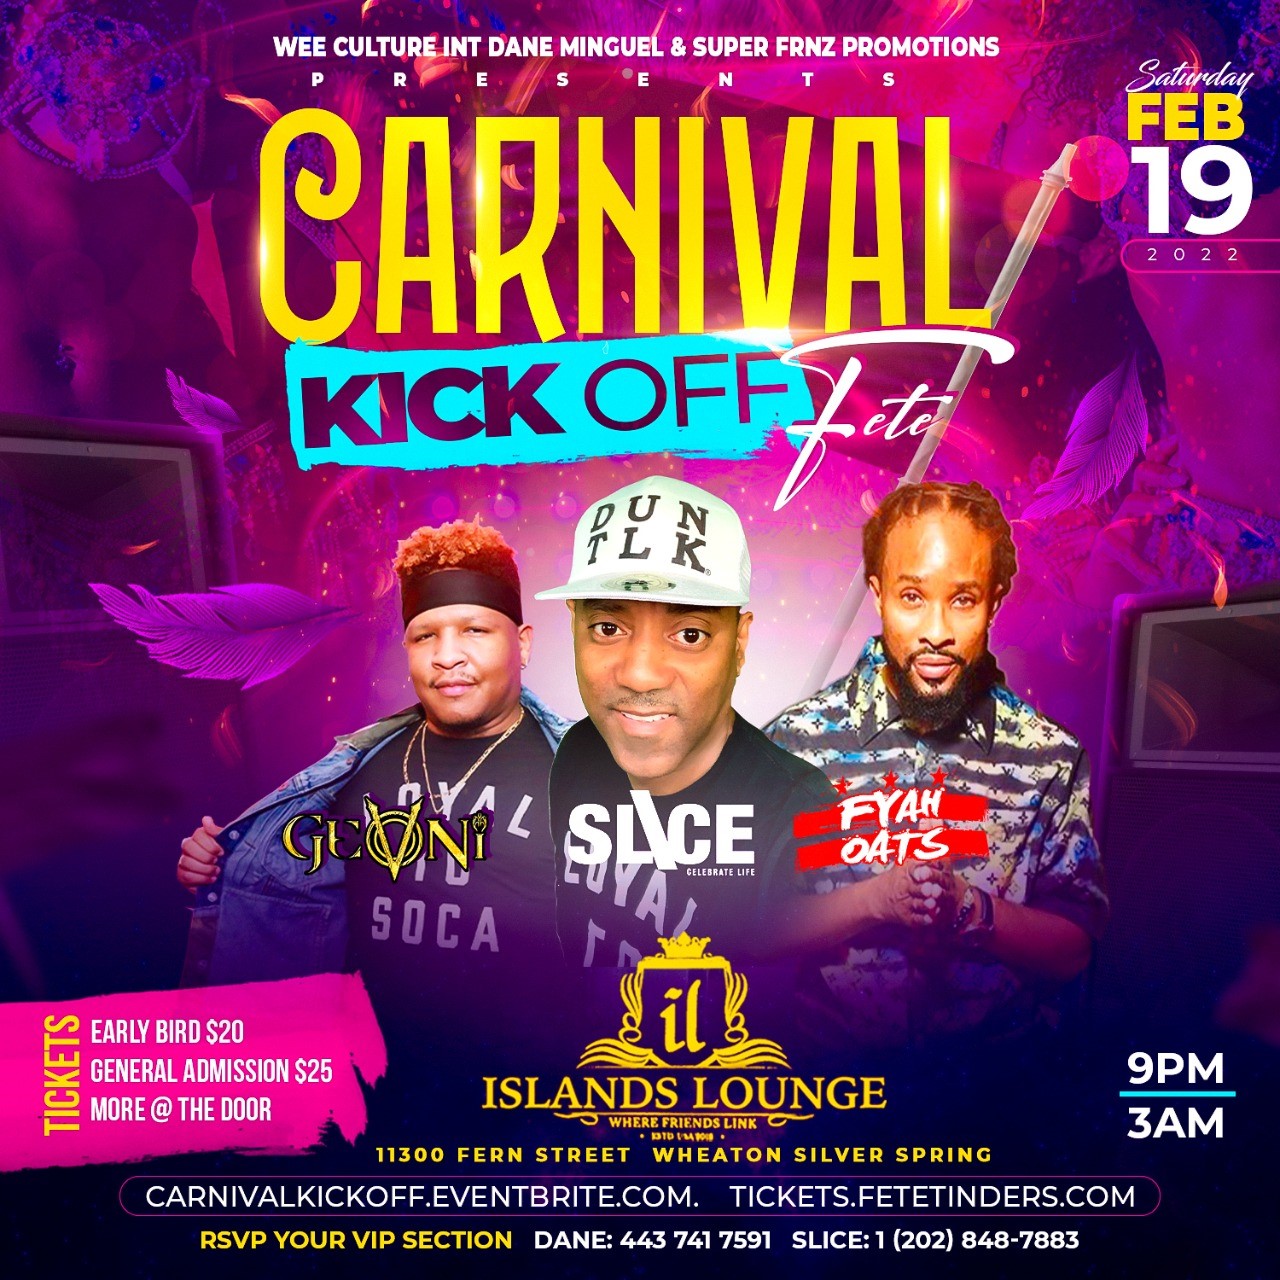 Carnival Kickoff  on feb. 19, 21:00@Islands Lounge - Buy tickets and Get information on www.fetefinders.com tickets.fetefinders.com